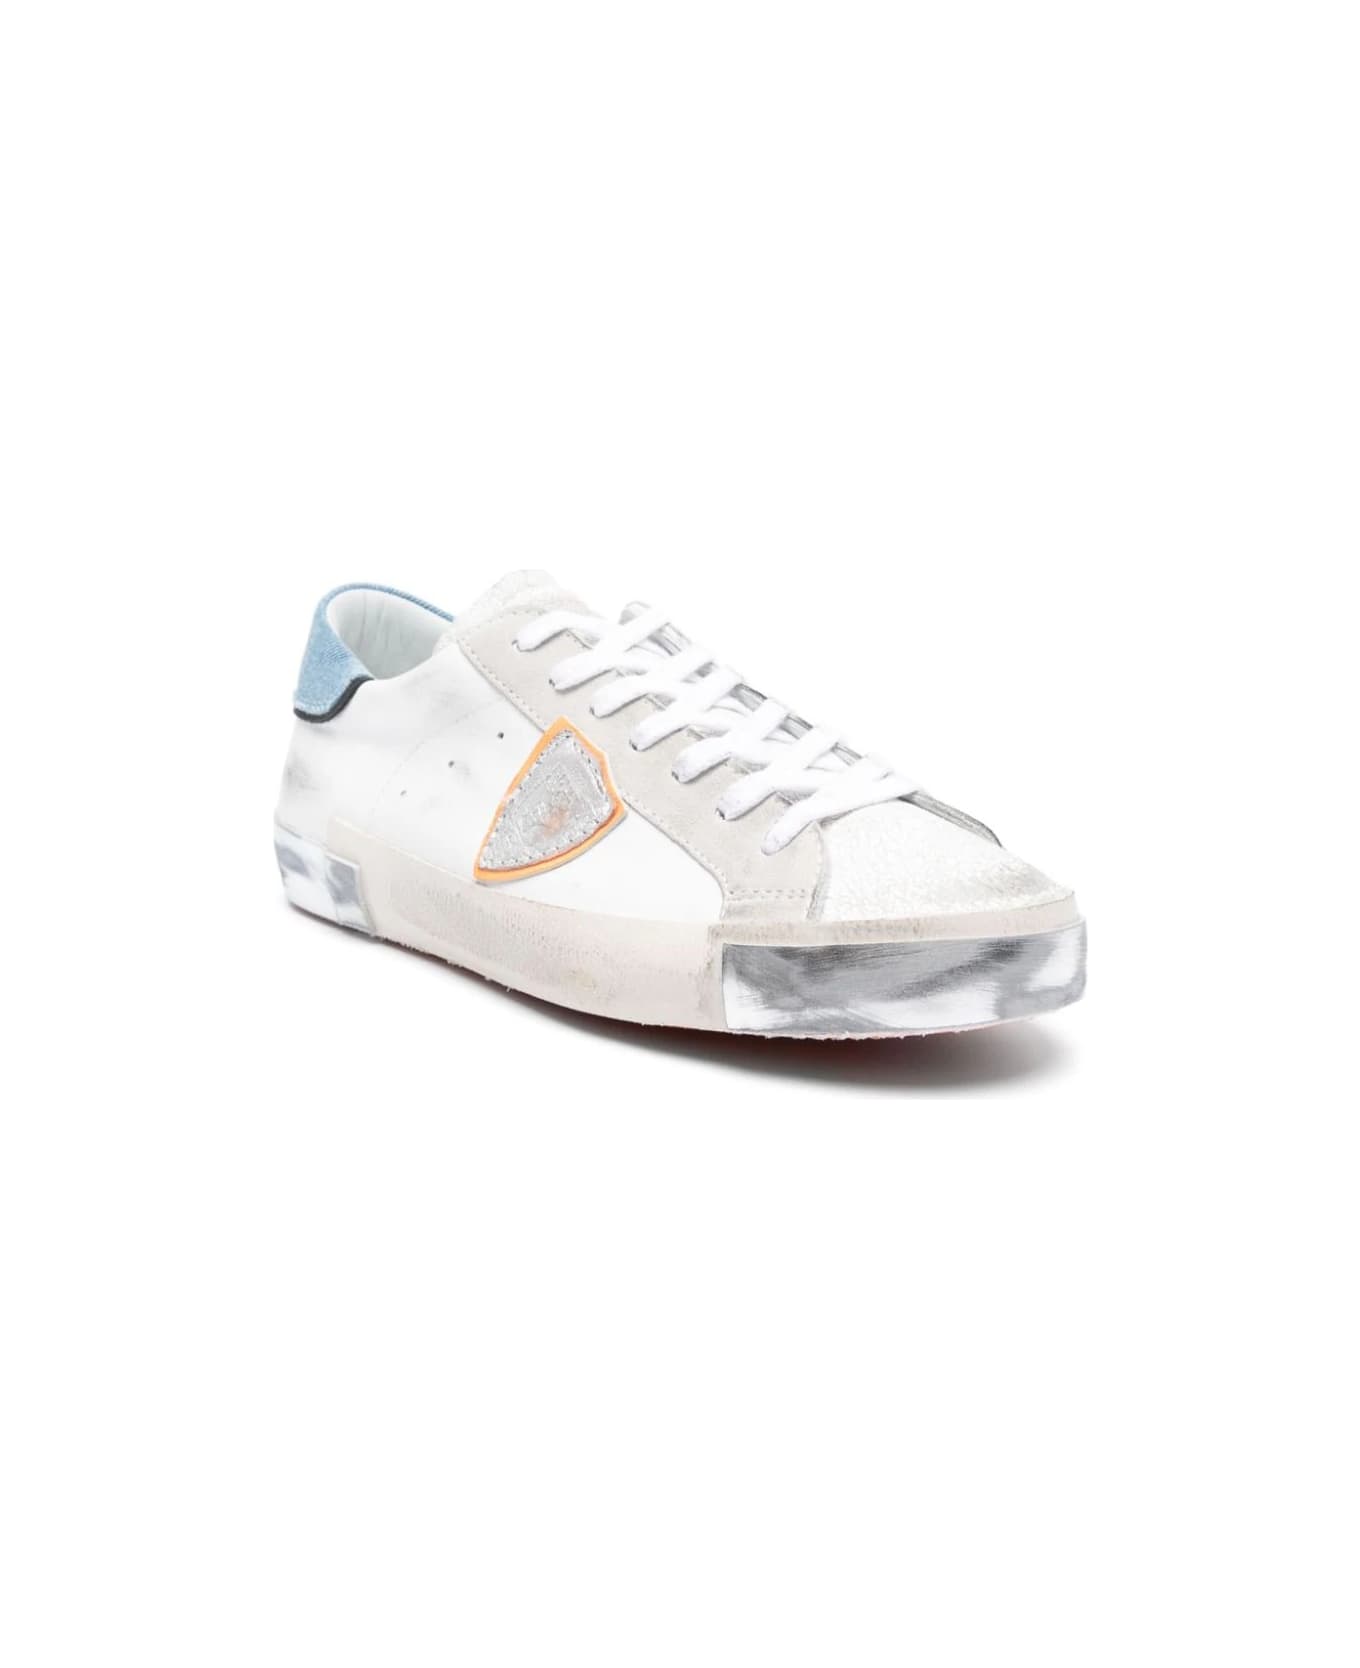 Philippe Model Prsx Low Sneakers - White And Light Blue - White スニーカー